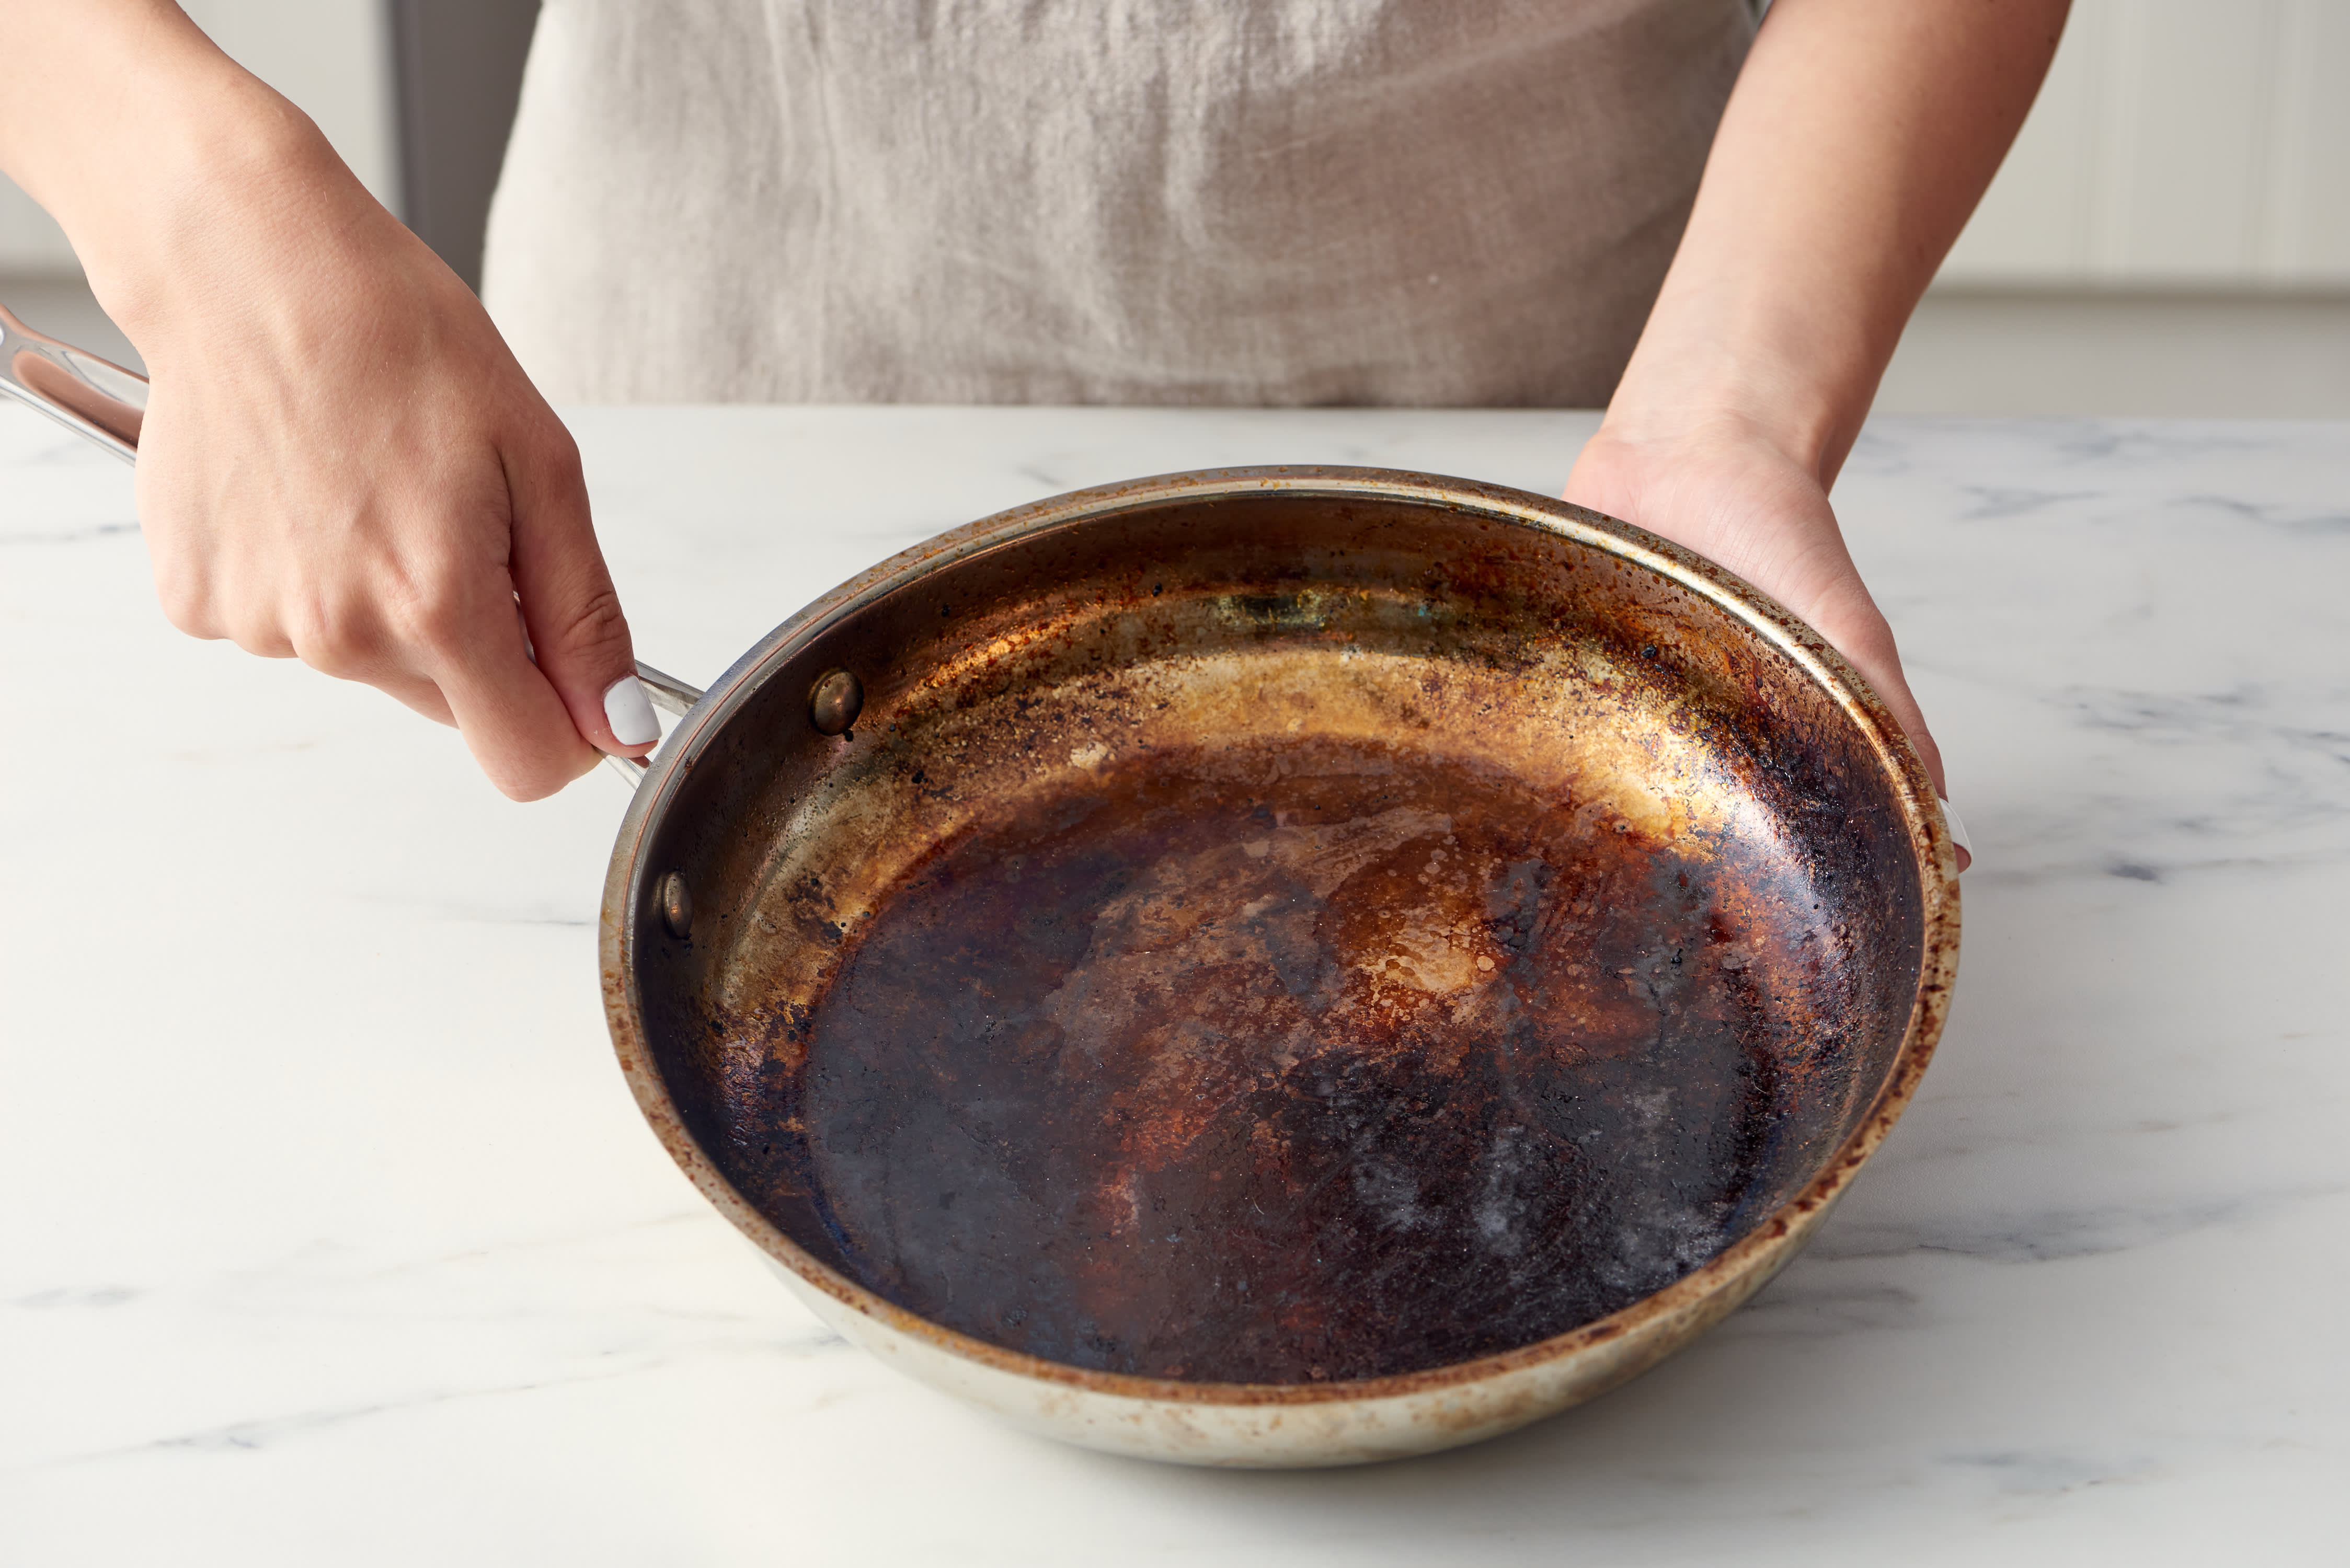 Best Way to Clean a Burnt Pan